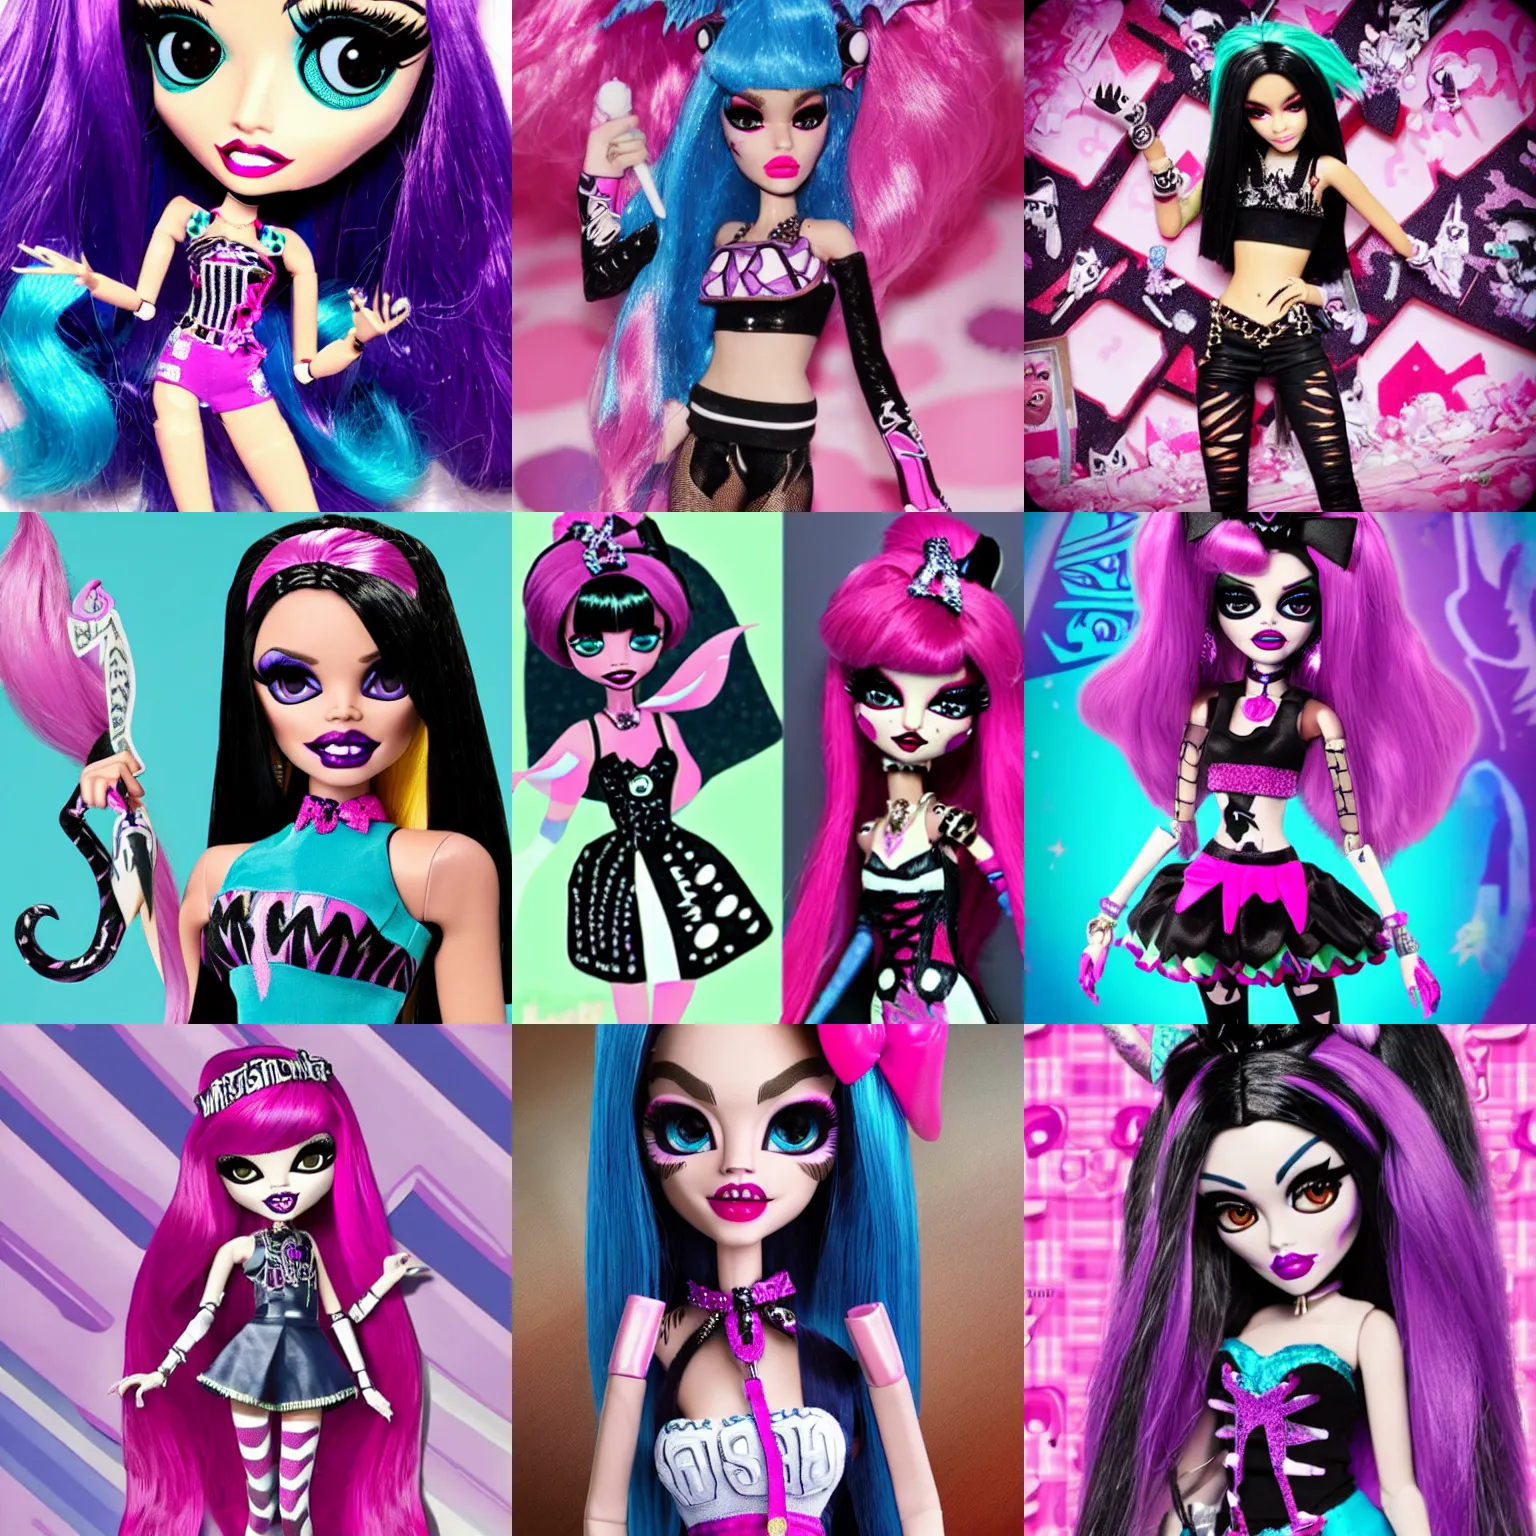 Prompt: Madison Beer as a Monster High doll